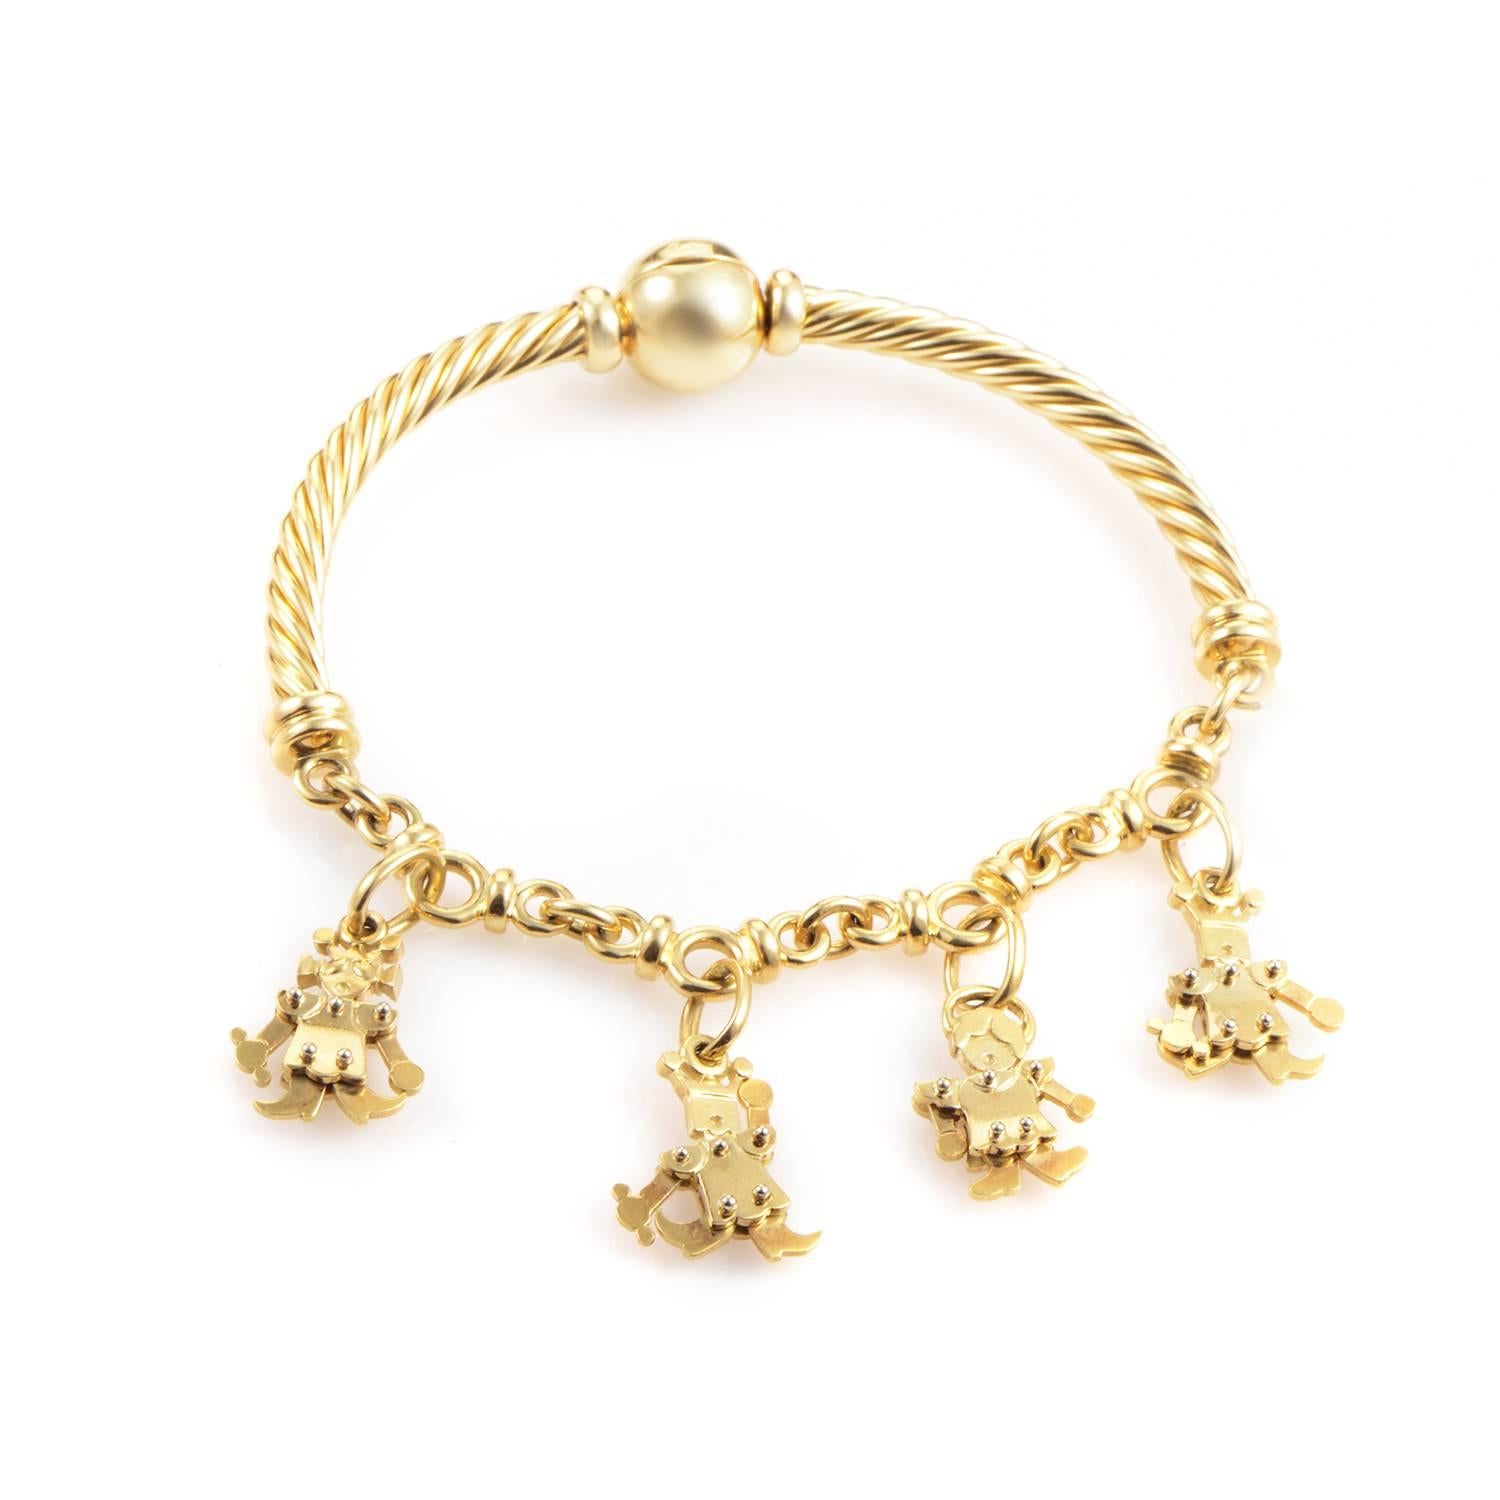 This adorable design from Pomellato is sure to dazzle and delight! The bracelet is made entirely of 18K yellow gold and boasts 4 adorable people-shaped charms.
Included Items: Manufacturer's Box